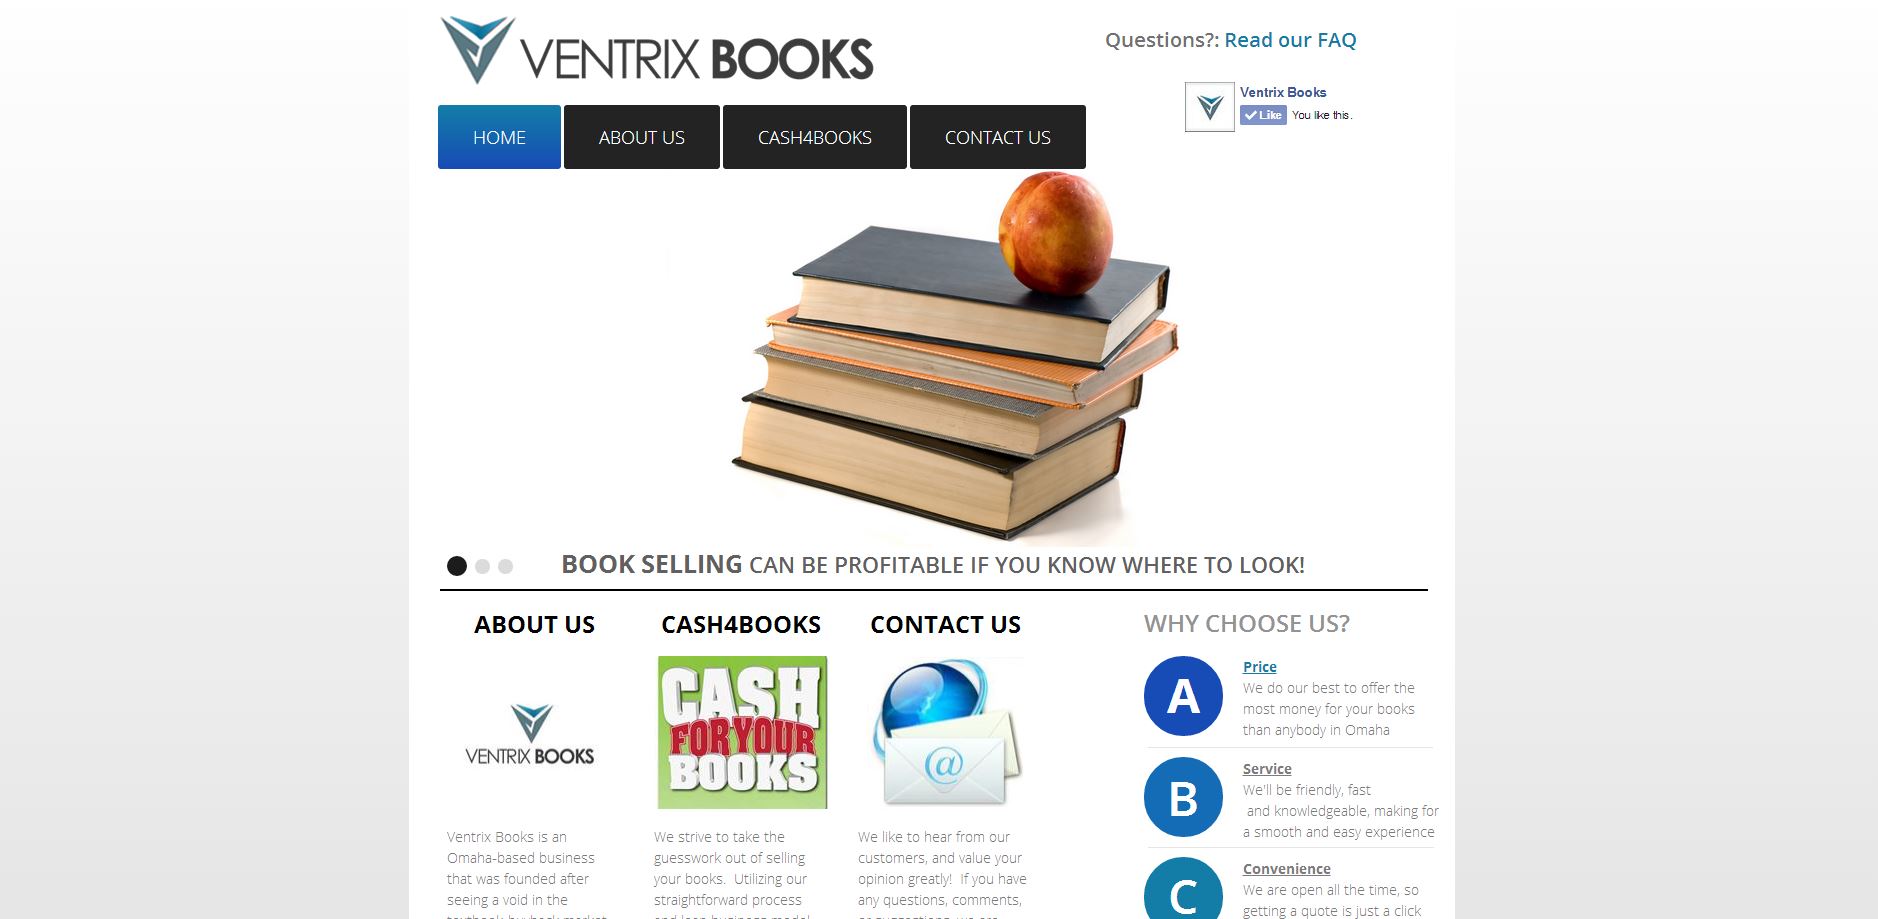 <a href="http://www.ventrixbooks.com/" target="_blank">ventrixbooks.com</a> - Sell your used textbooks just in time for the holidays. Enter the information requested, and within a day you will have a personalized quote. While they are a small startup company, they pay more than most bookstores and other online book buyers.